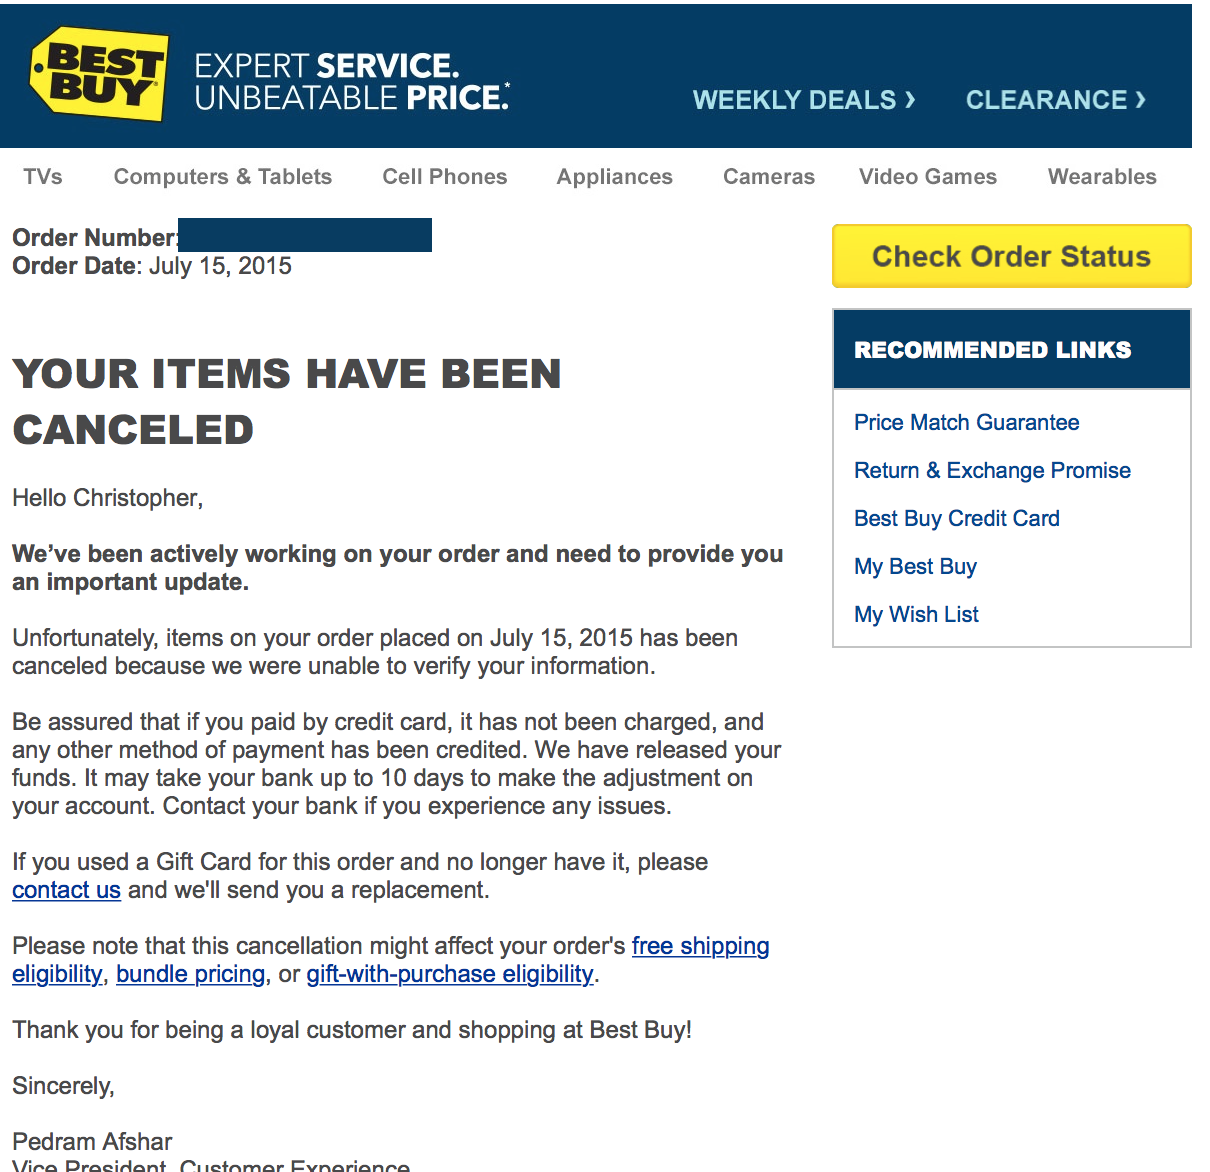 Best Buy Sells $200 Gift Cards For $15, Cancels Orders